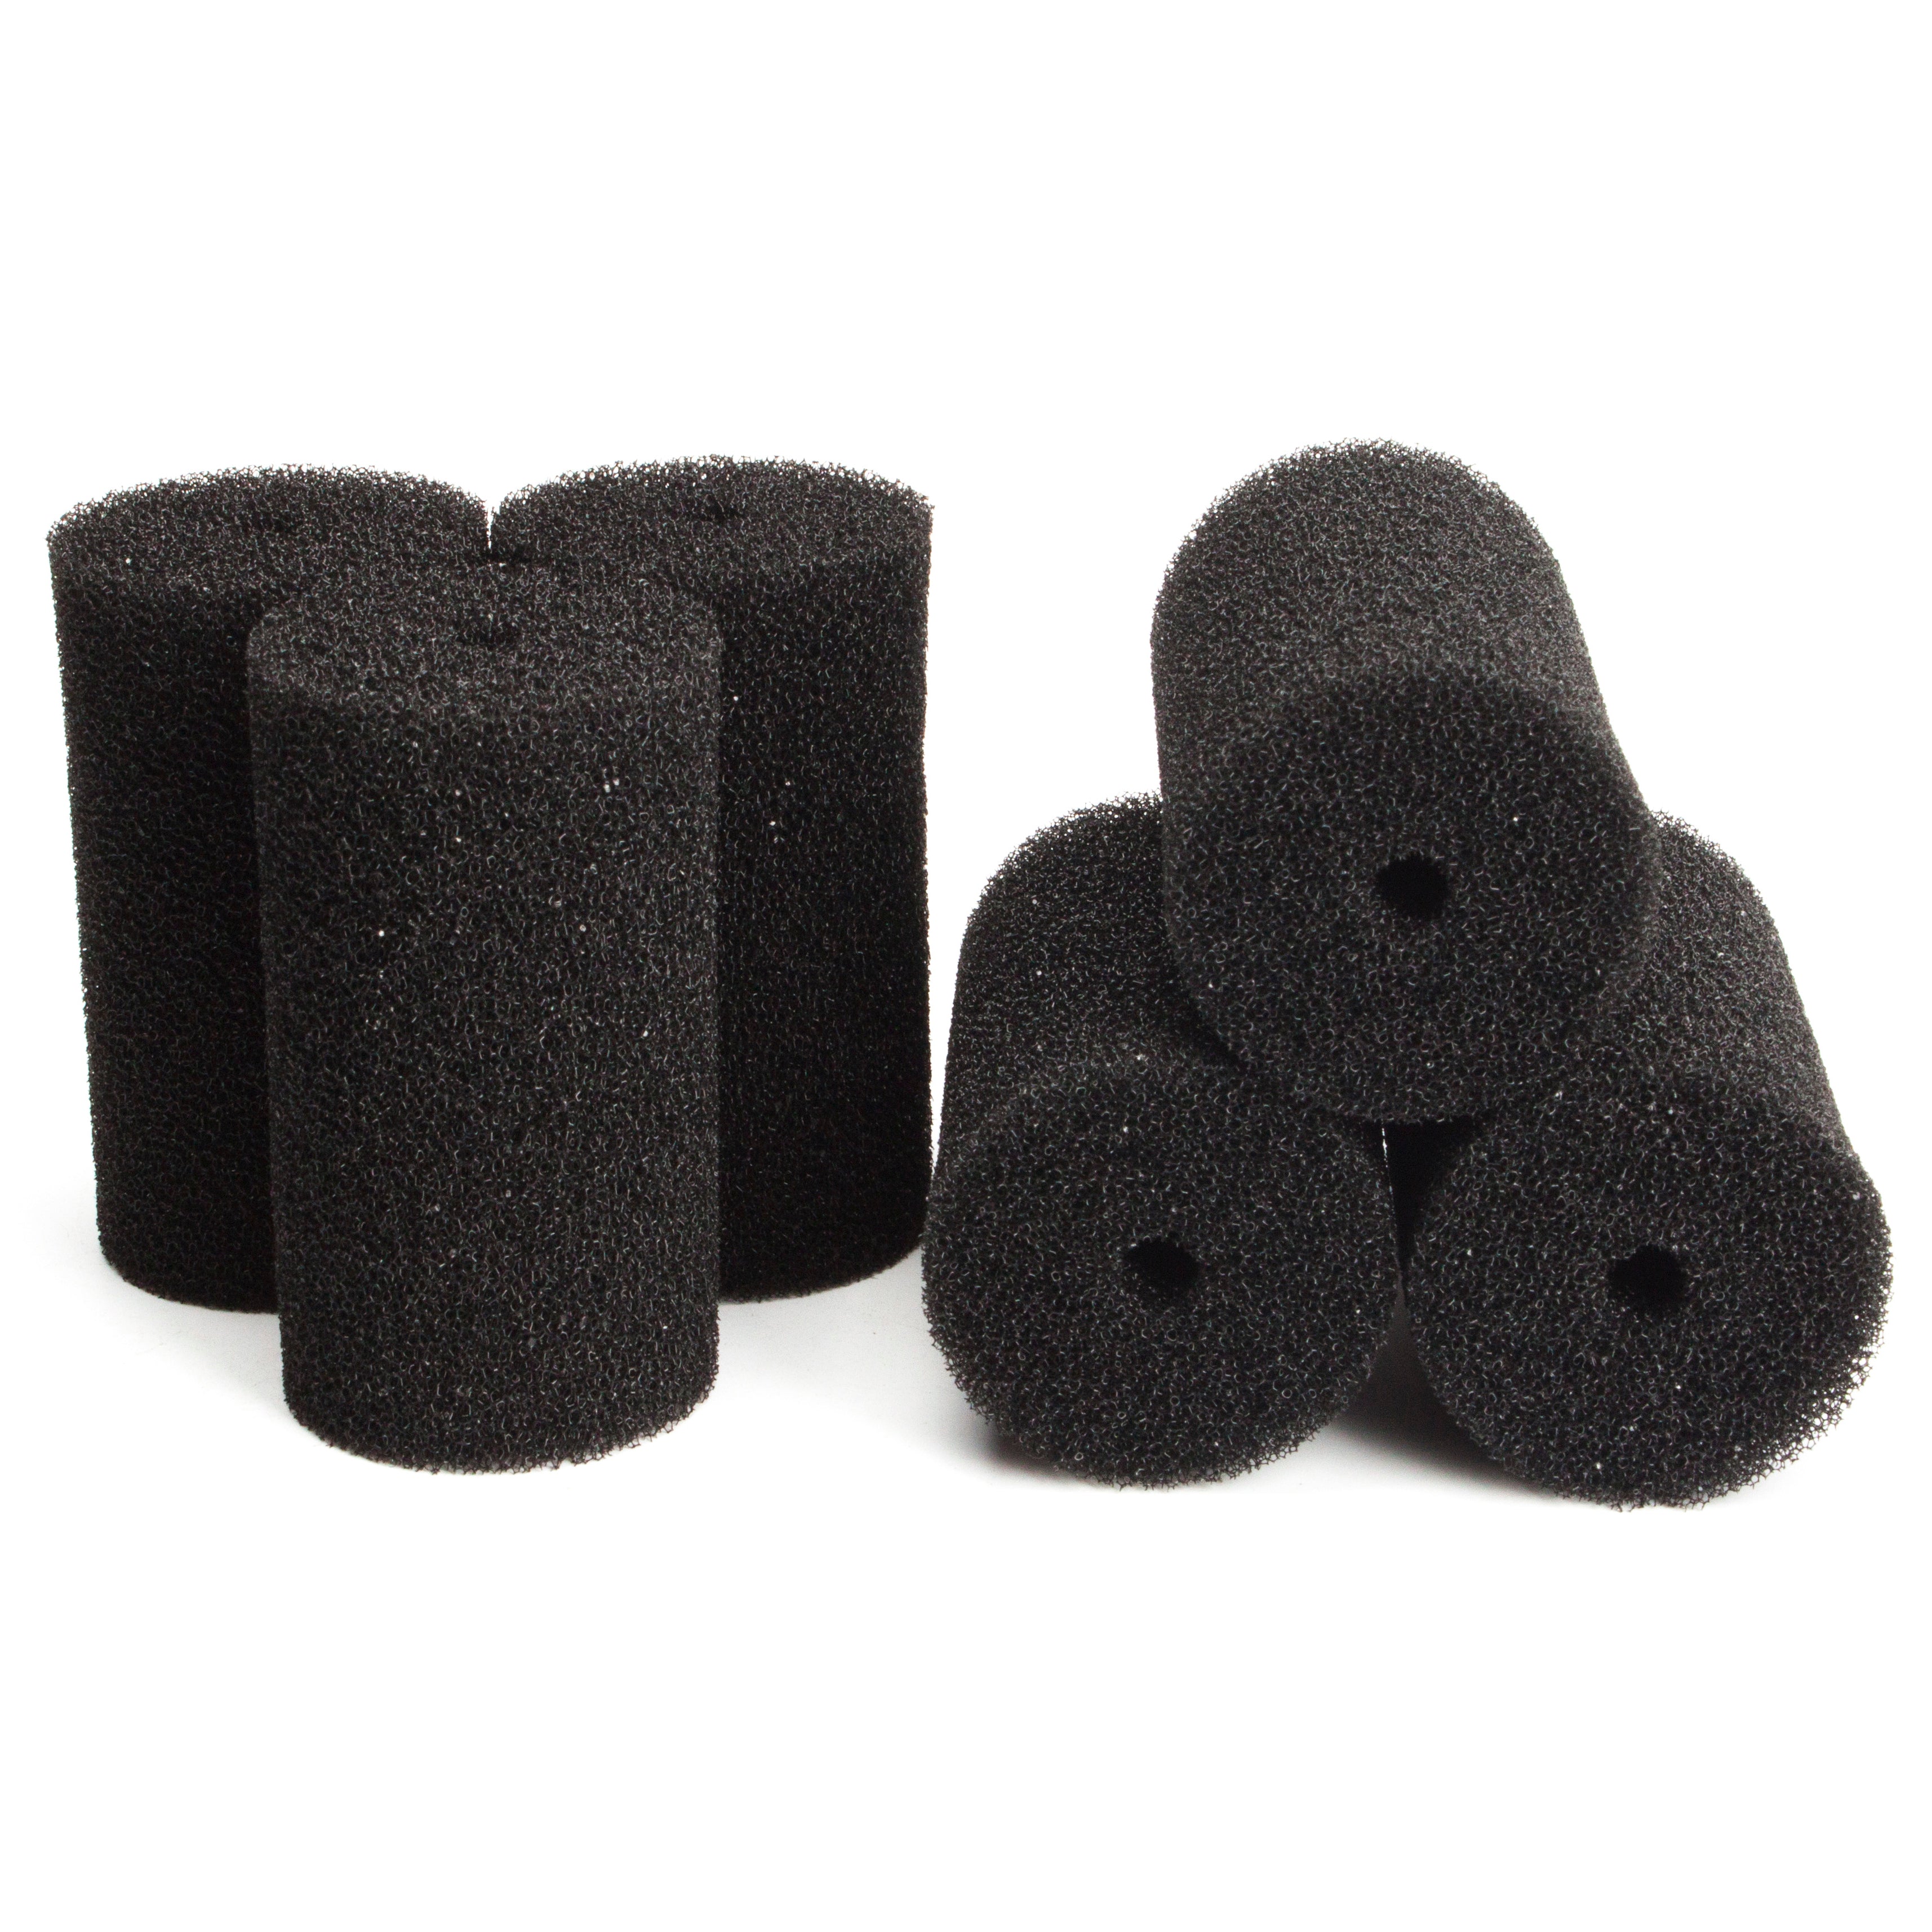 LTWHOME AEO19055 Round Large Filter Sponge Fit for Zoo Med's 501 External Filter (Pack of 6)